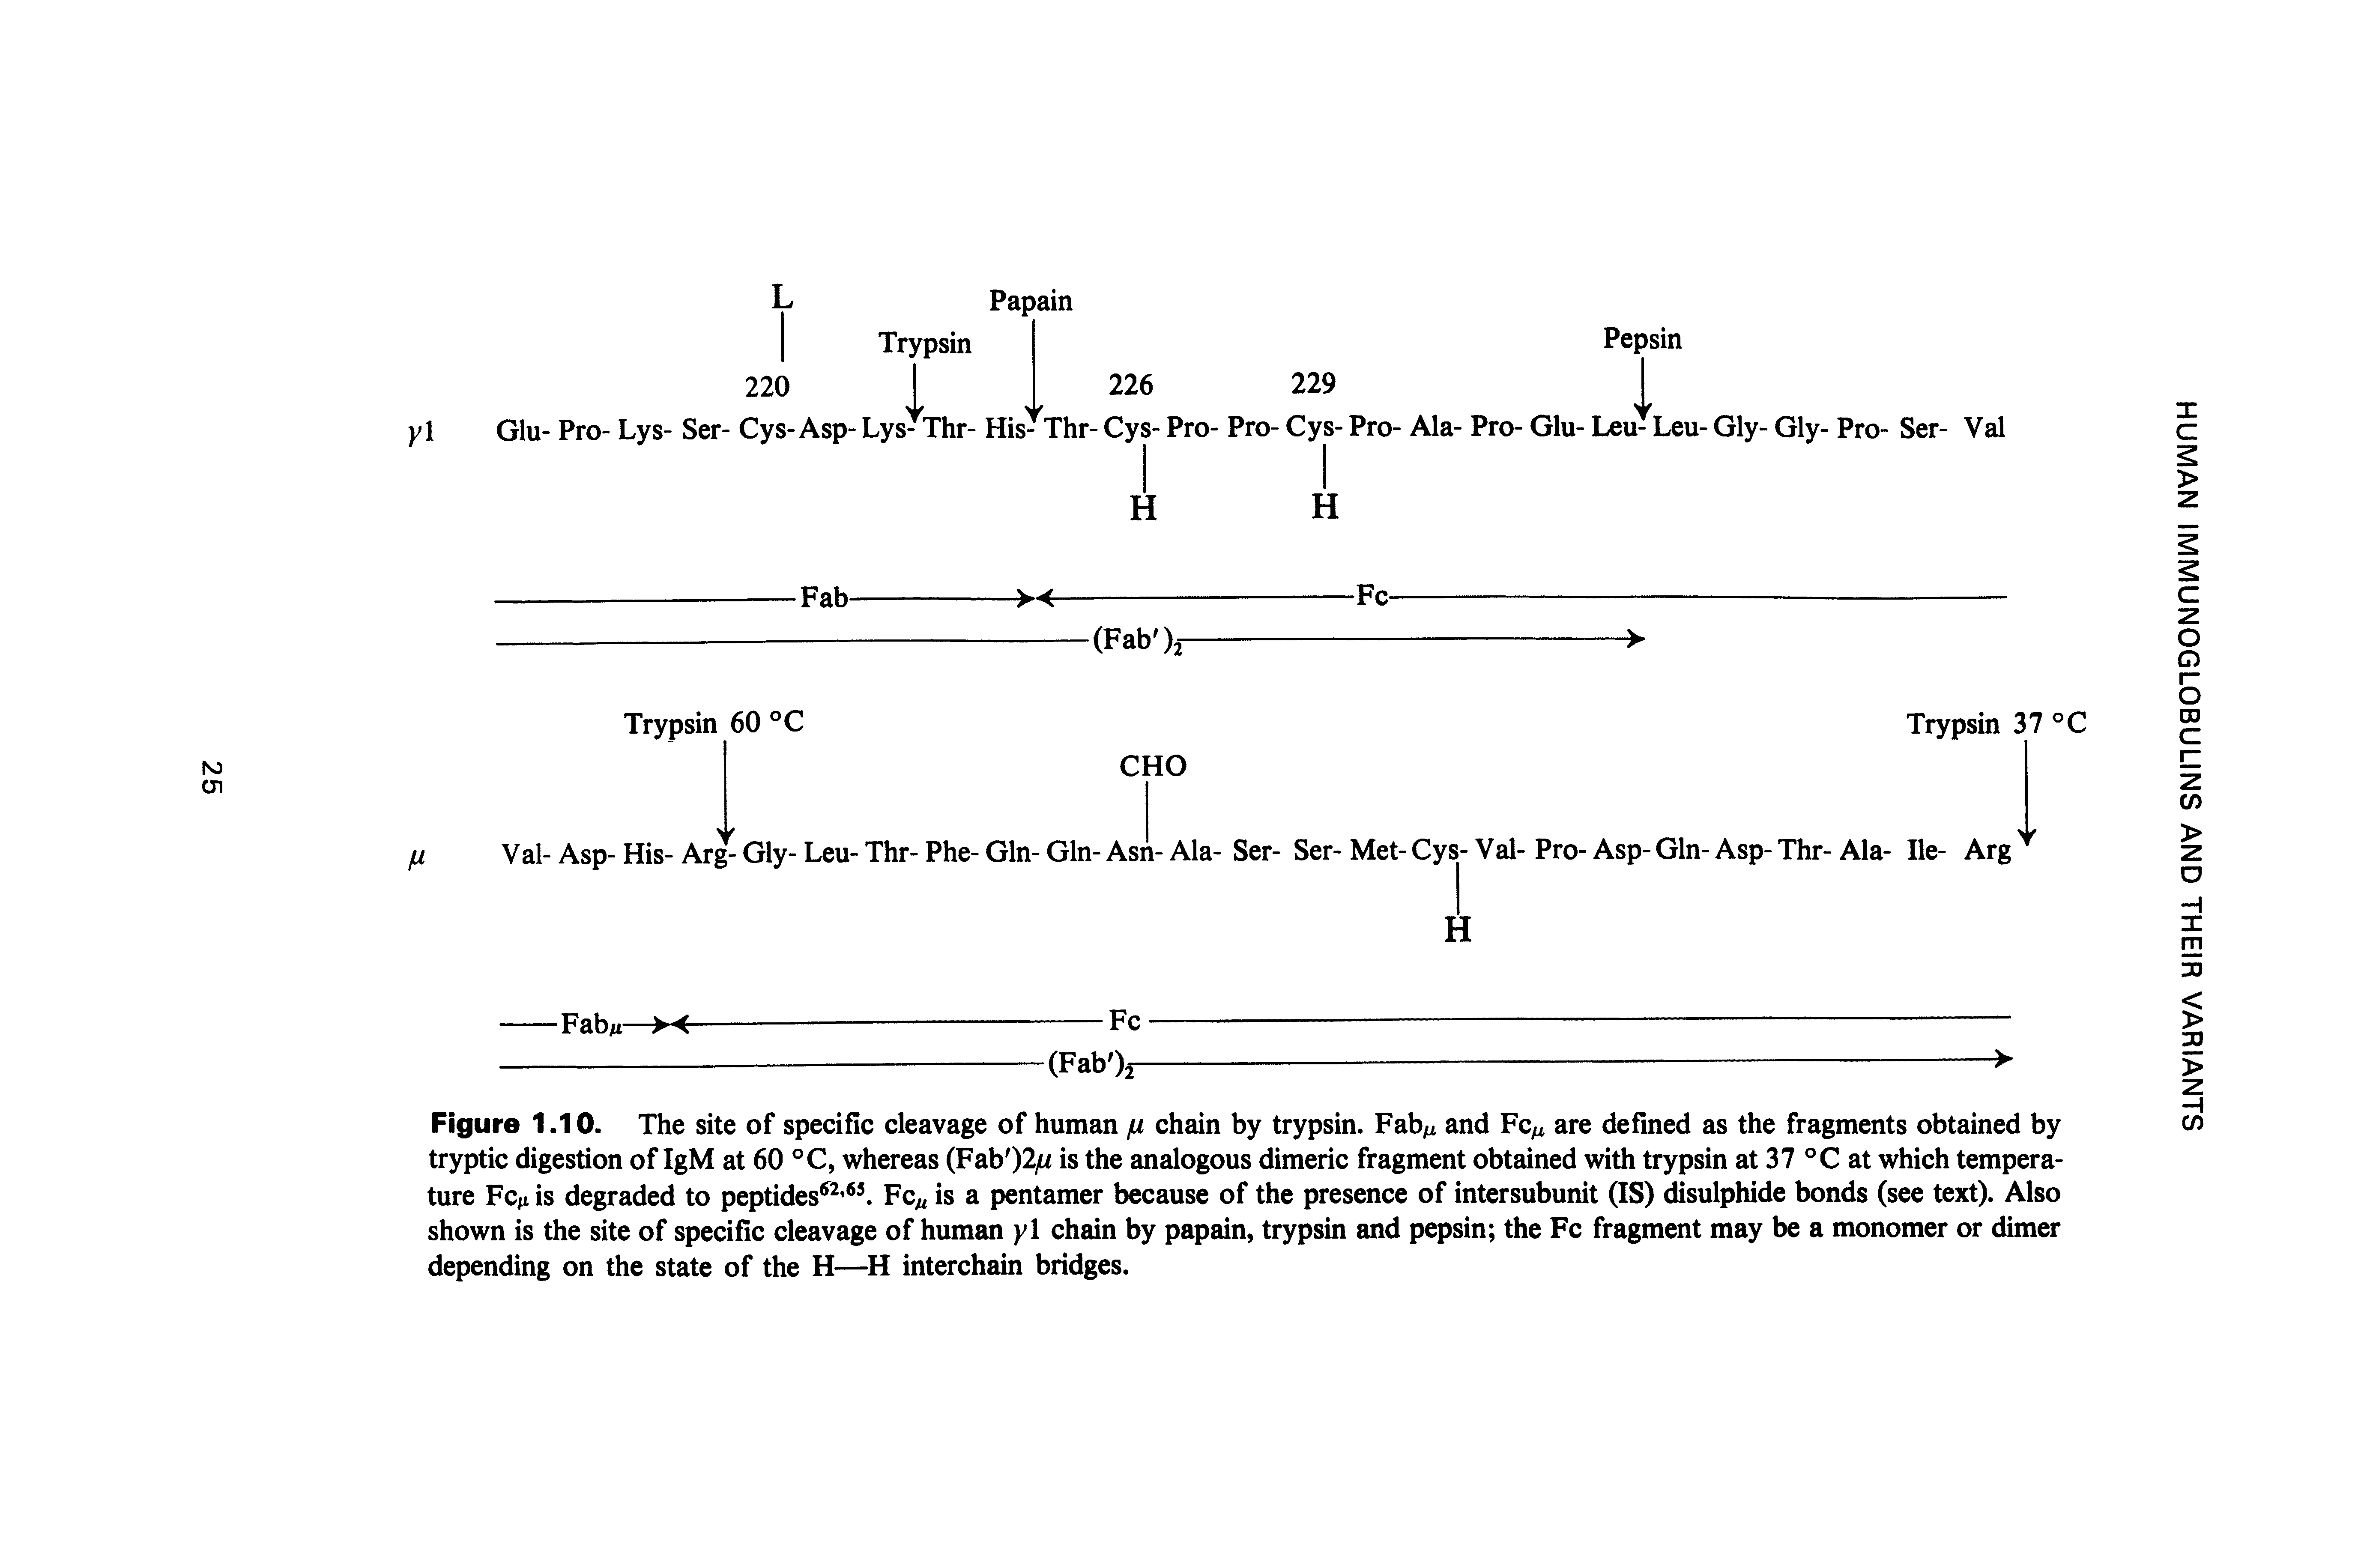 Figure 1.10. The site of specific cleavage of human fi chain by trypsin. Fab and Fc t are defined as the fragments obtained by tryptic digestion of IgM at 60 °C, whereas (Fab )2 is the analogous dimeric fragment obtained with trypsin at 37 C at which temperature Fc t is degraded to peptides Fc is a pentamer because of the presence of intersubunit (IS) disulphide bonds (see text). Also shown is the site of specific cleavage of human yl chain by papain, trypsin and pepsin the Fc fragment may be a monomer or dimer depending on the state of the H— H interchain bridges.